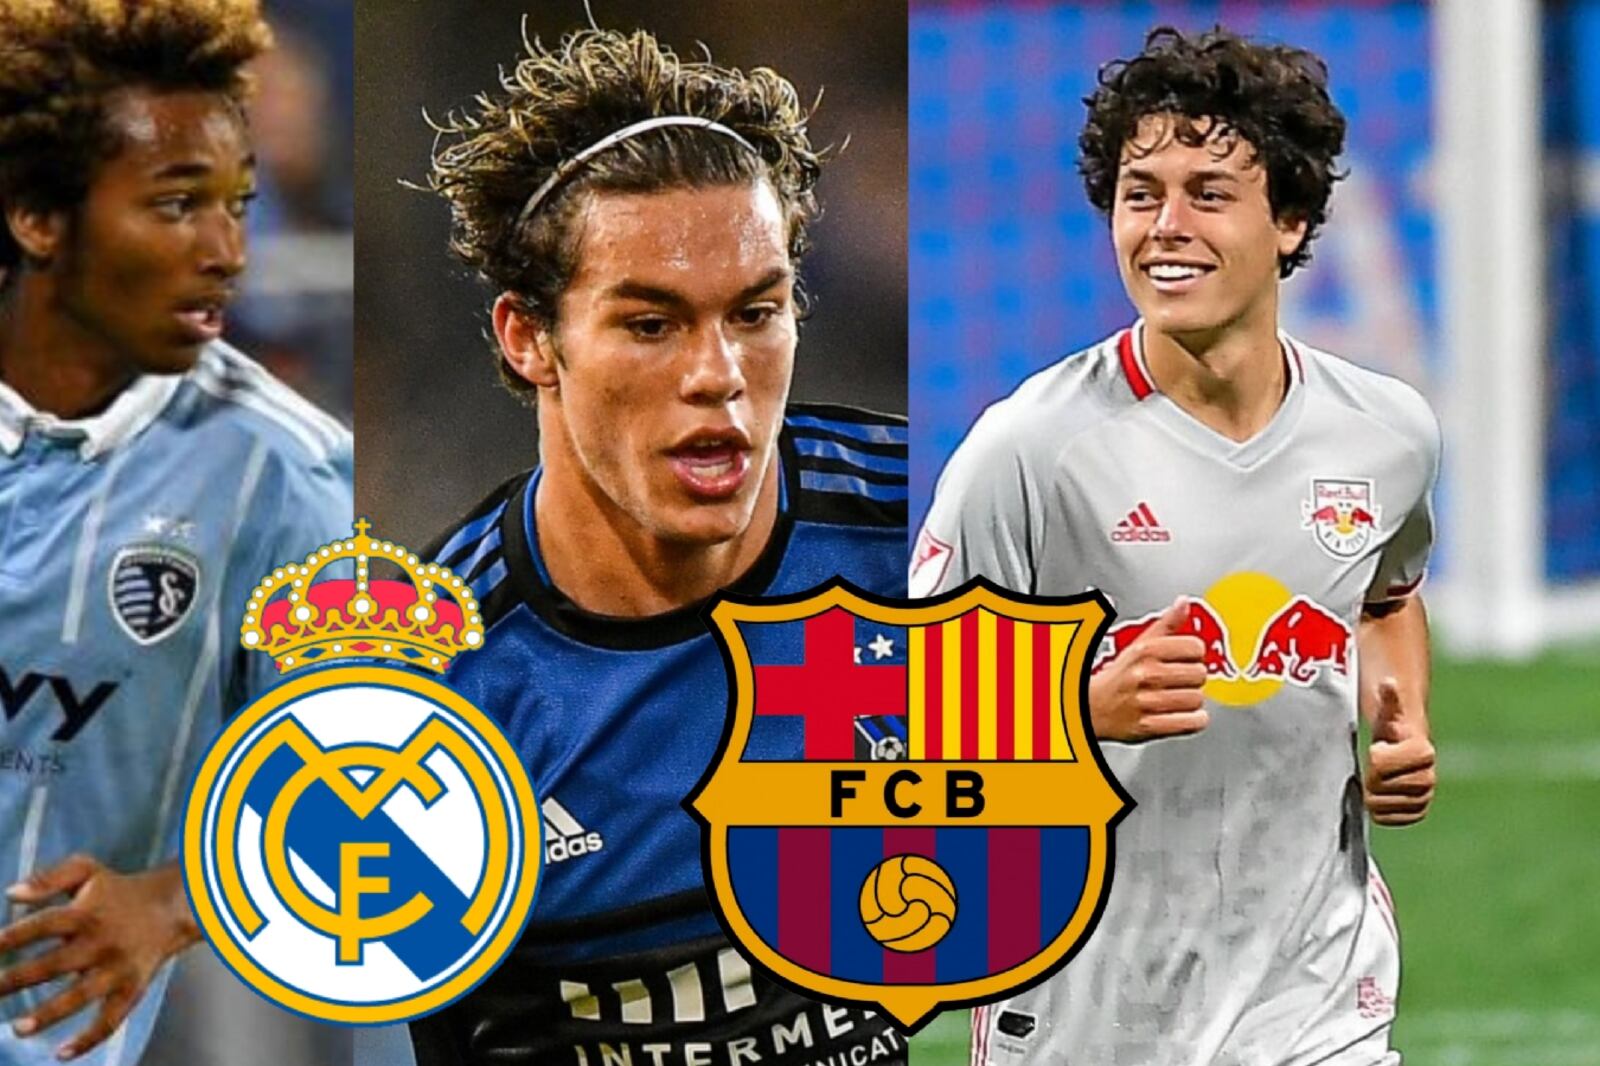 FC Barcelona and Real Madrid are competing for one of the jewels of MLS